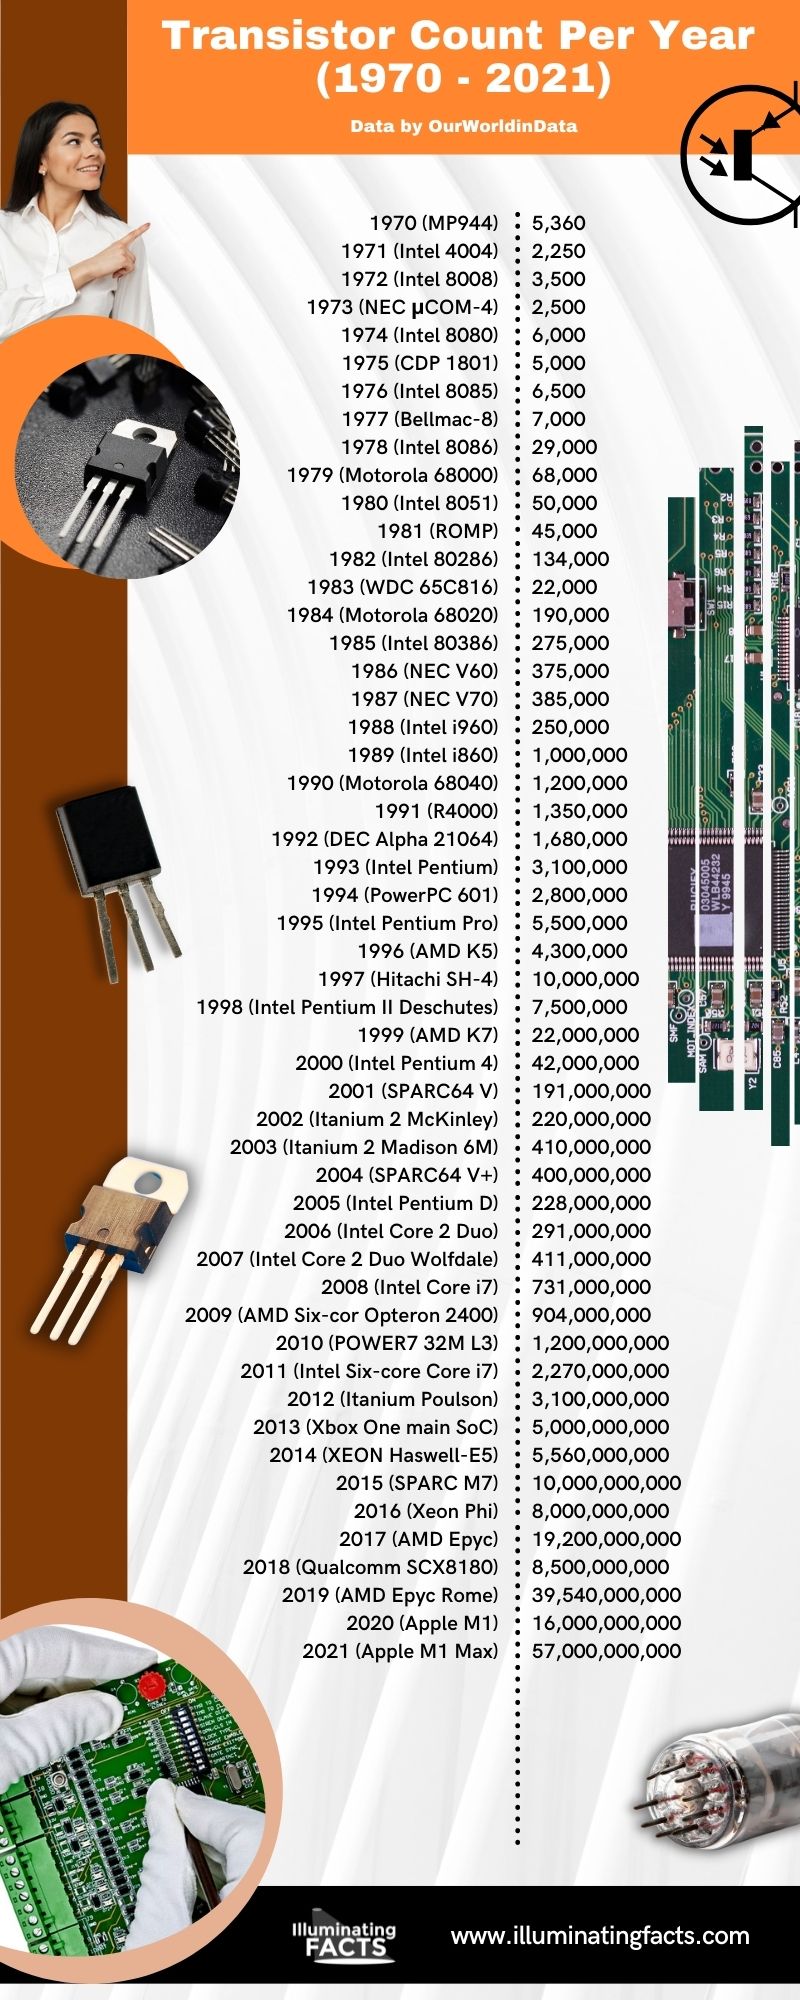 Transistor Count Per Year (1970 - 2021)